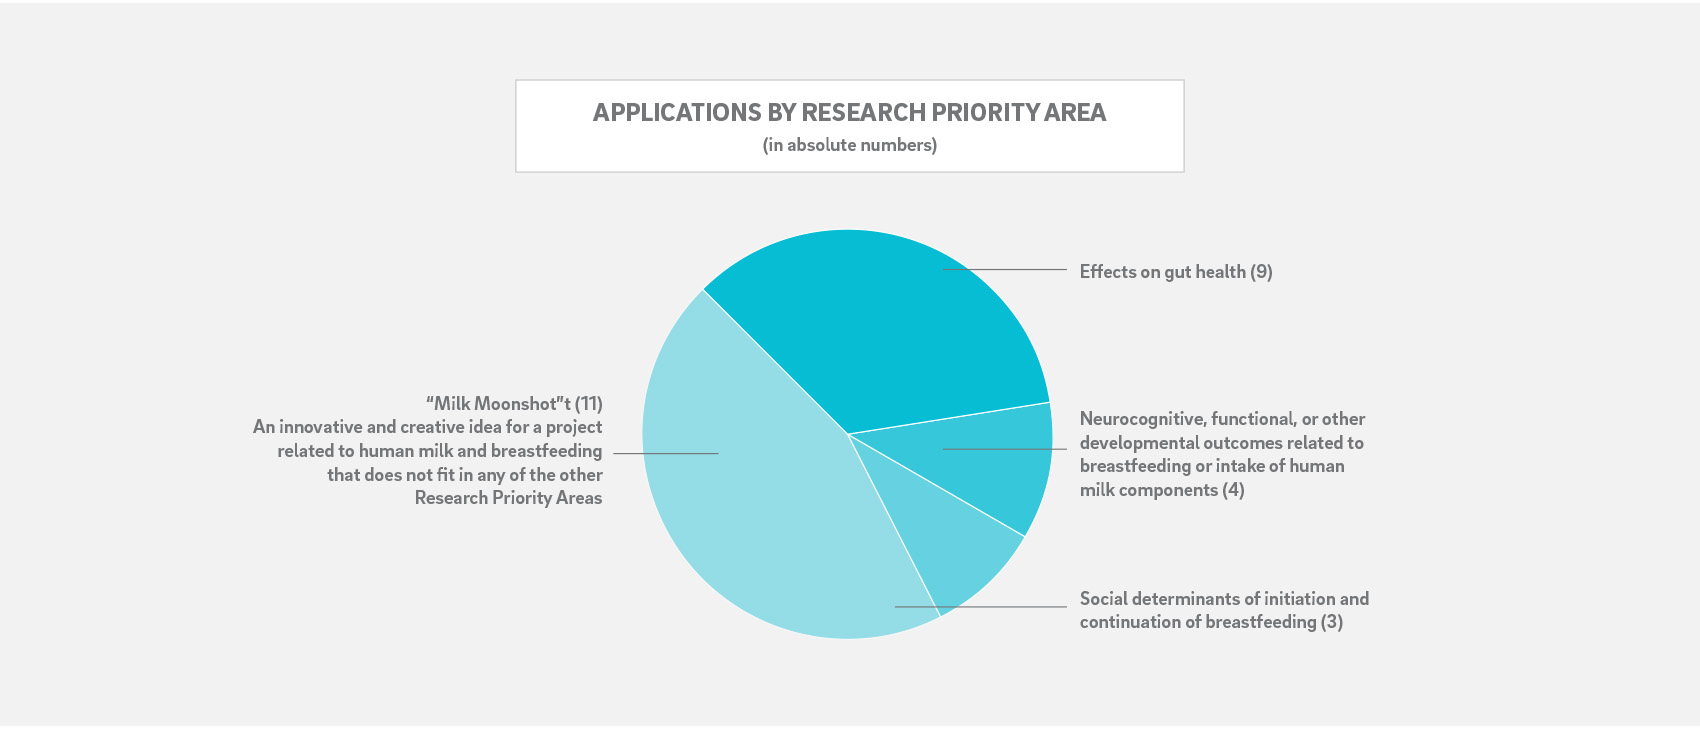 pie chart for application percentages by research priority area